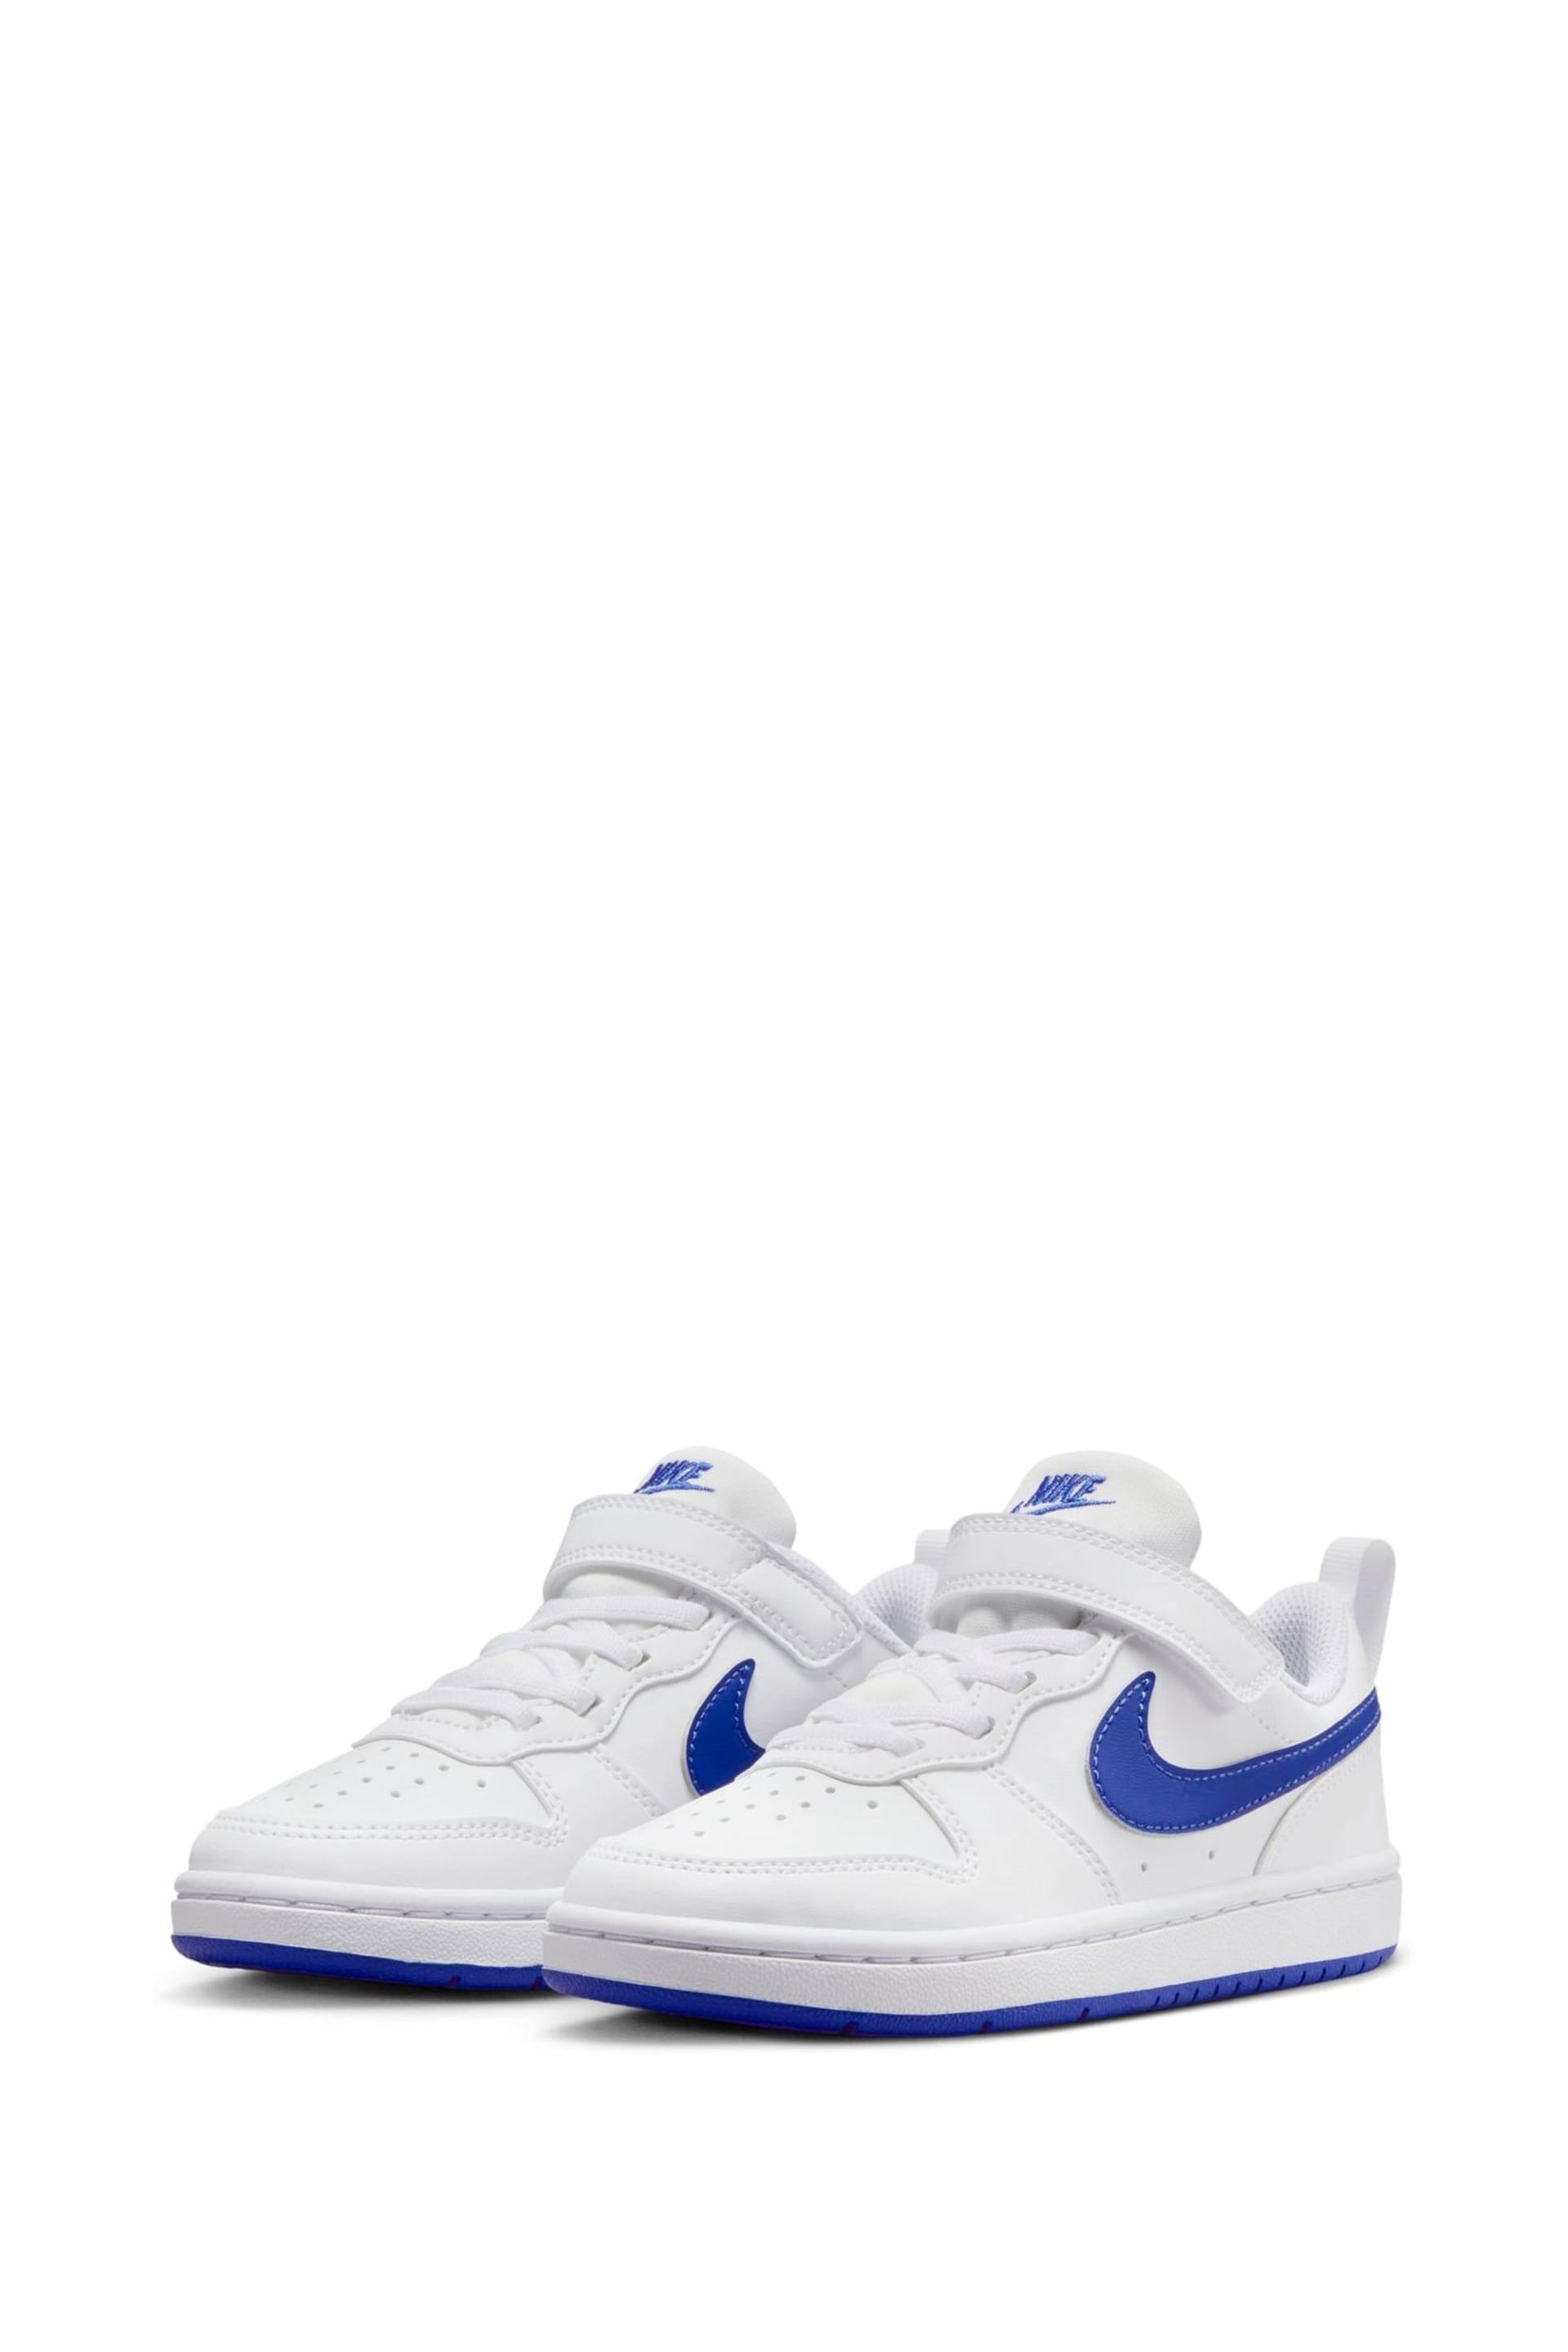 Nike White/Blue Junior Court Borough Low Recraft Trainers - Image 6 of 12